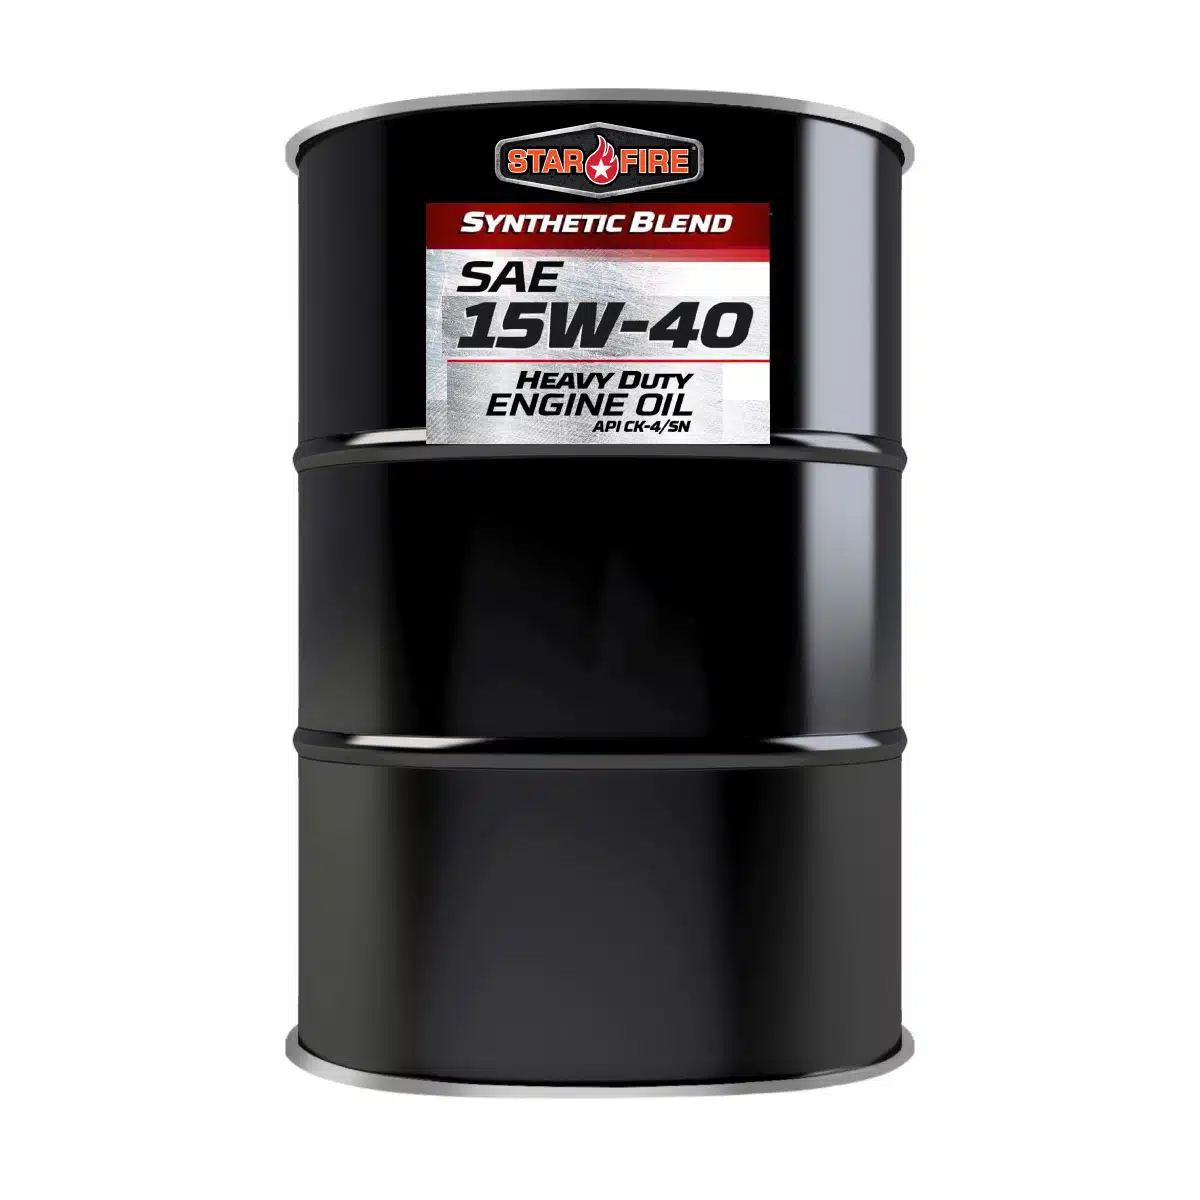 55 Drum Synthetic Blend Heavy Duty Engine Oil 15w-40